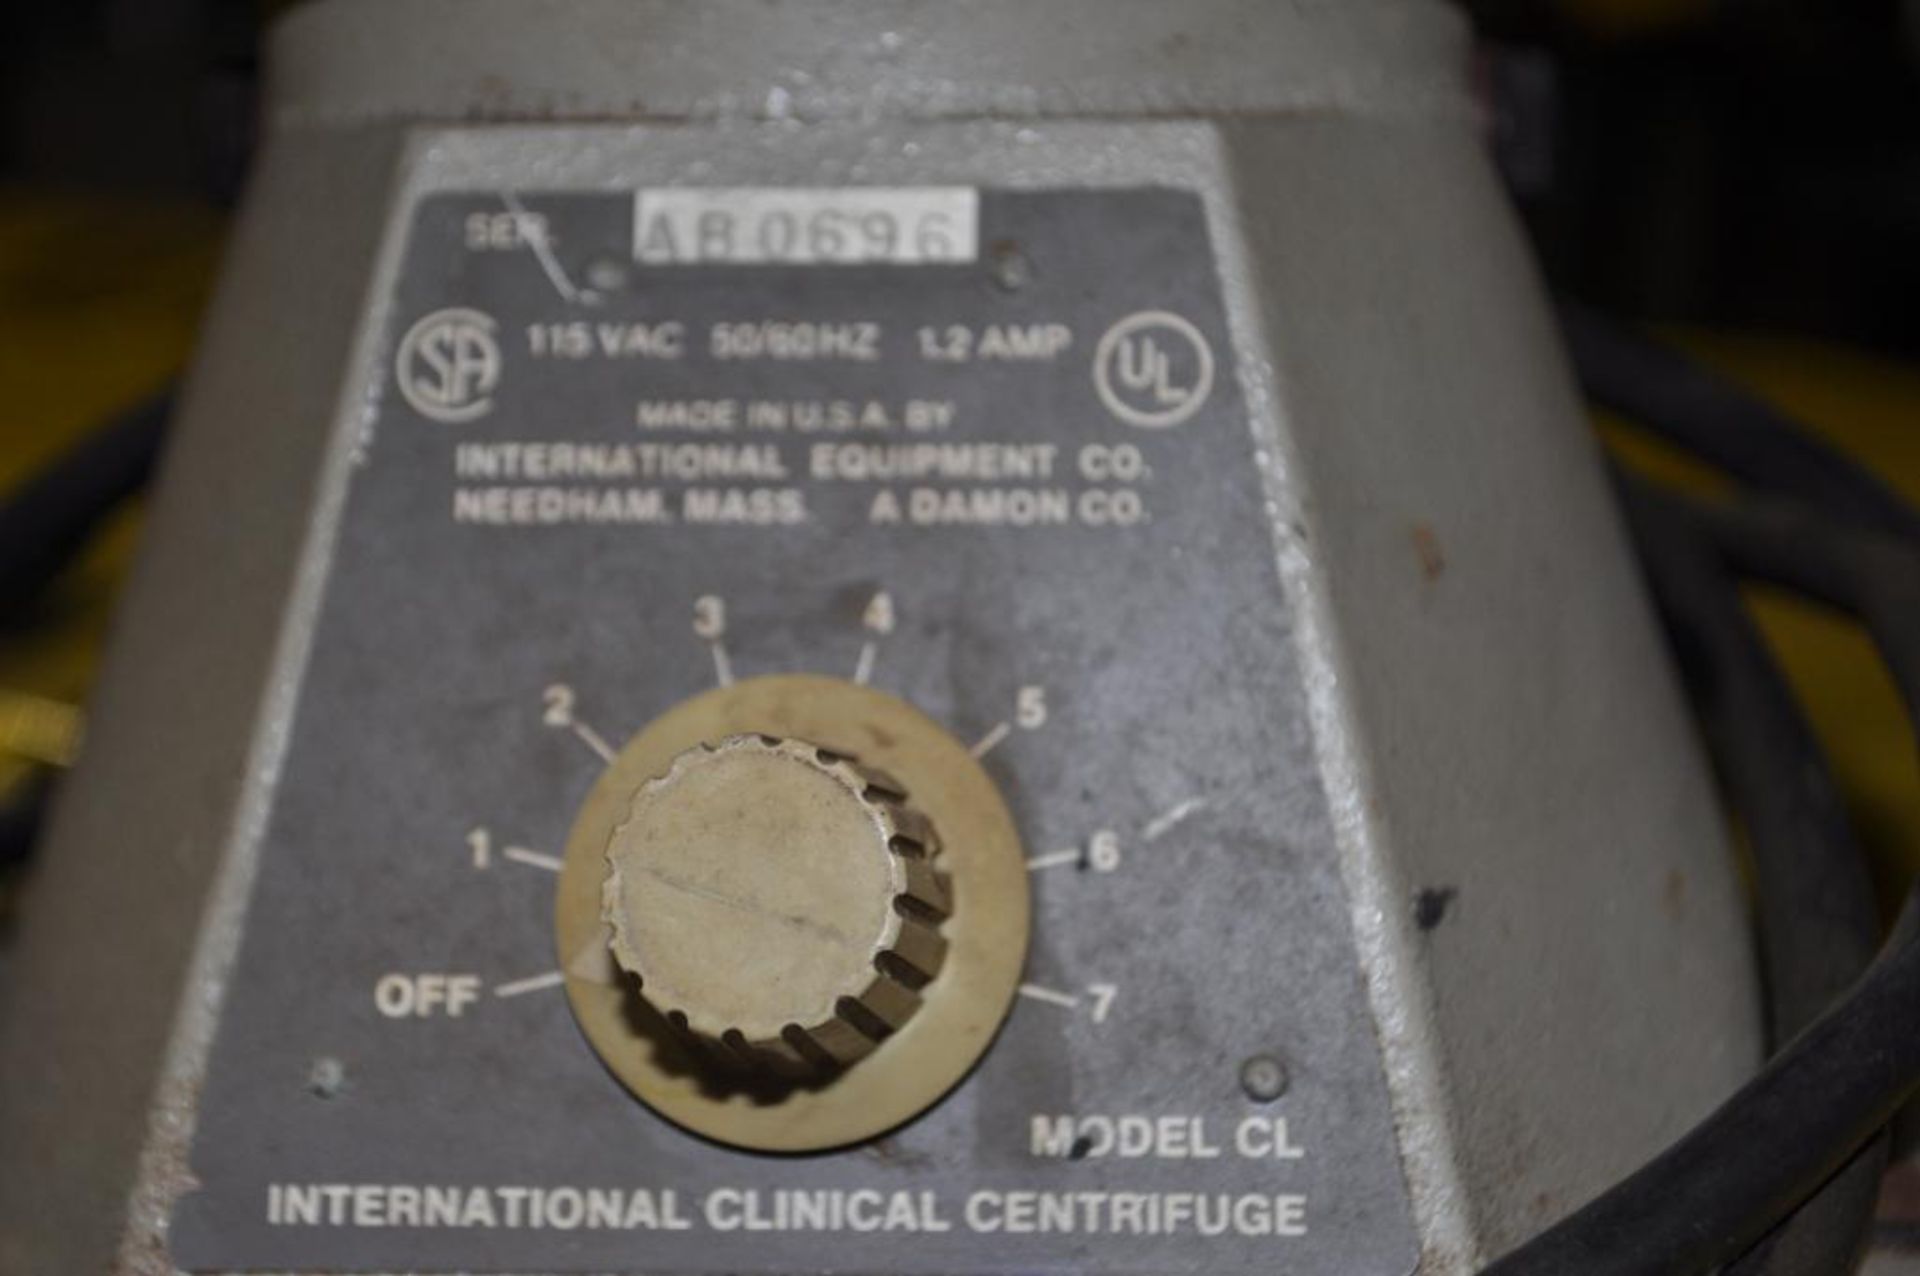 (3X) INTERNATIONAL CLINIC CENTRIFUGES, MODEL: CL, 120 VOLTS - Image 2 of 4